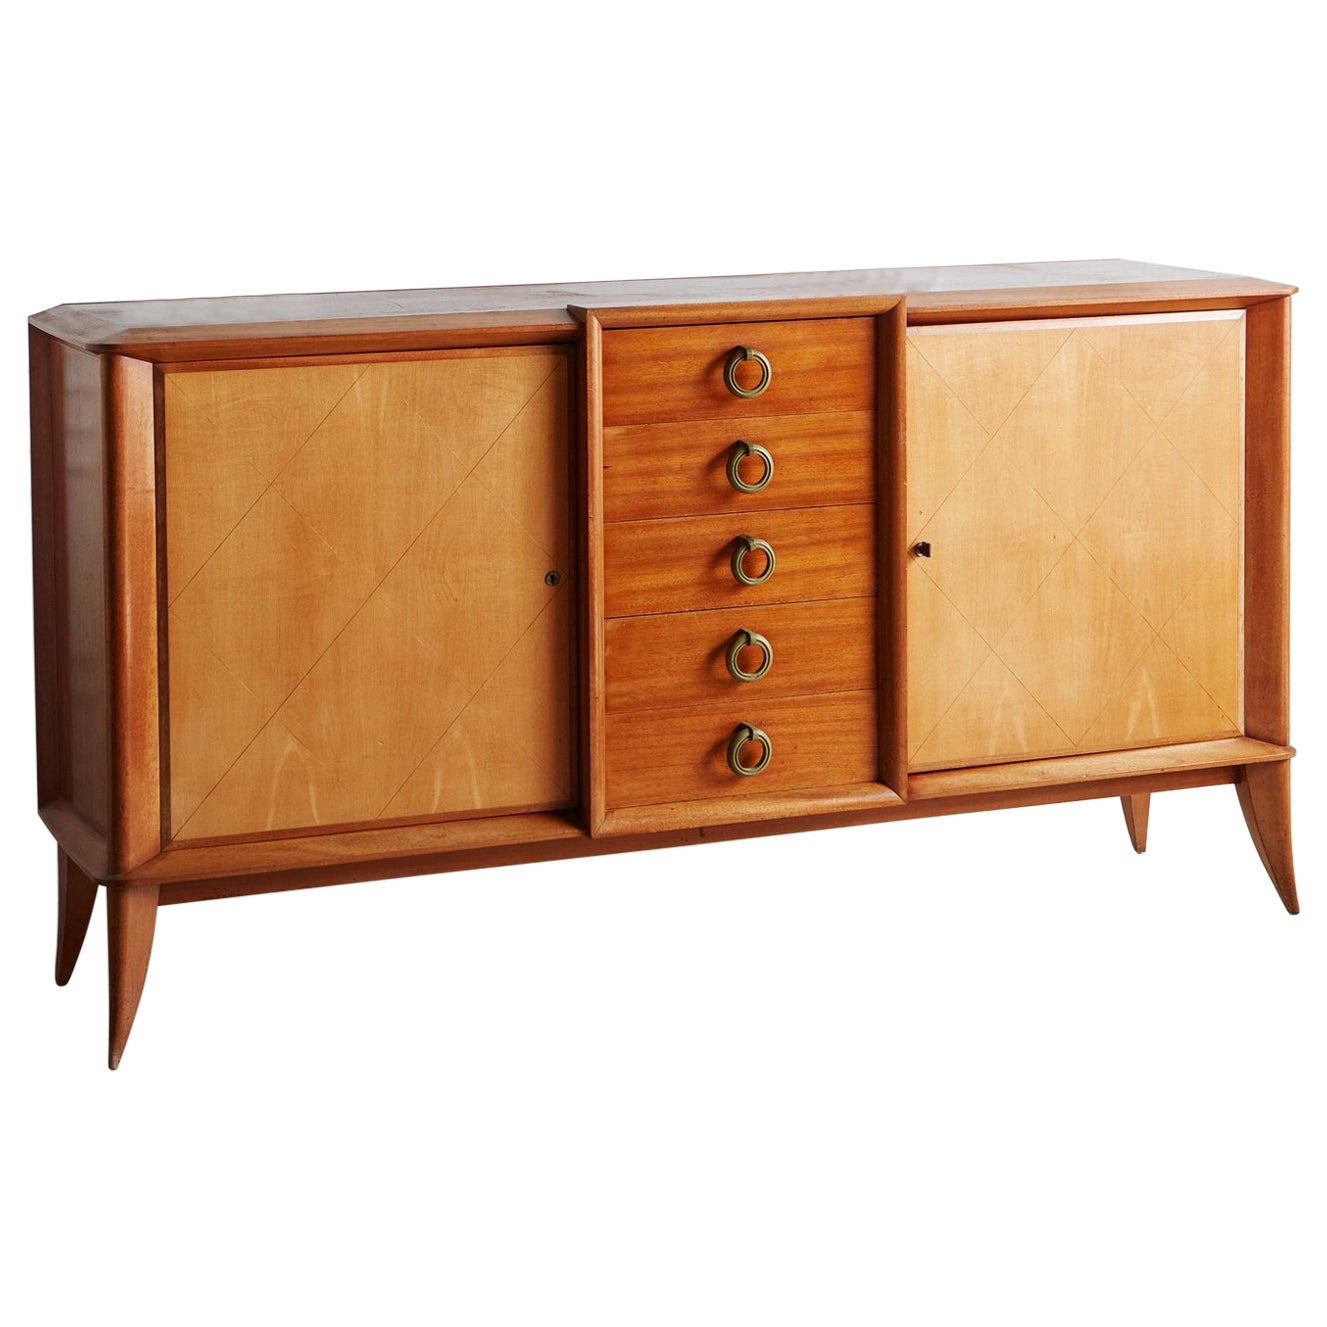 Bleached Mahogany Credenza With Cherry Wood Drawers, France 20th Century